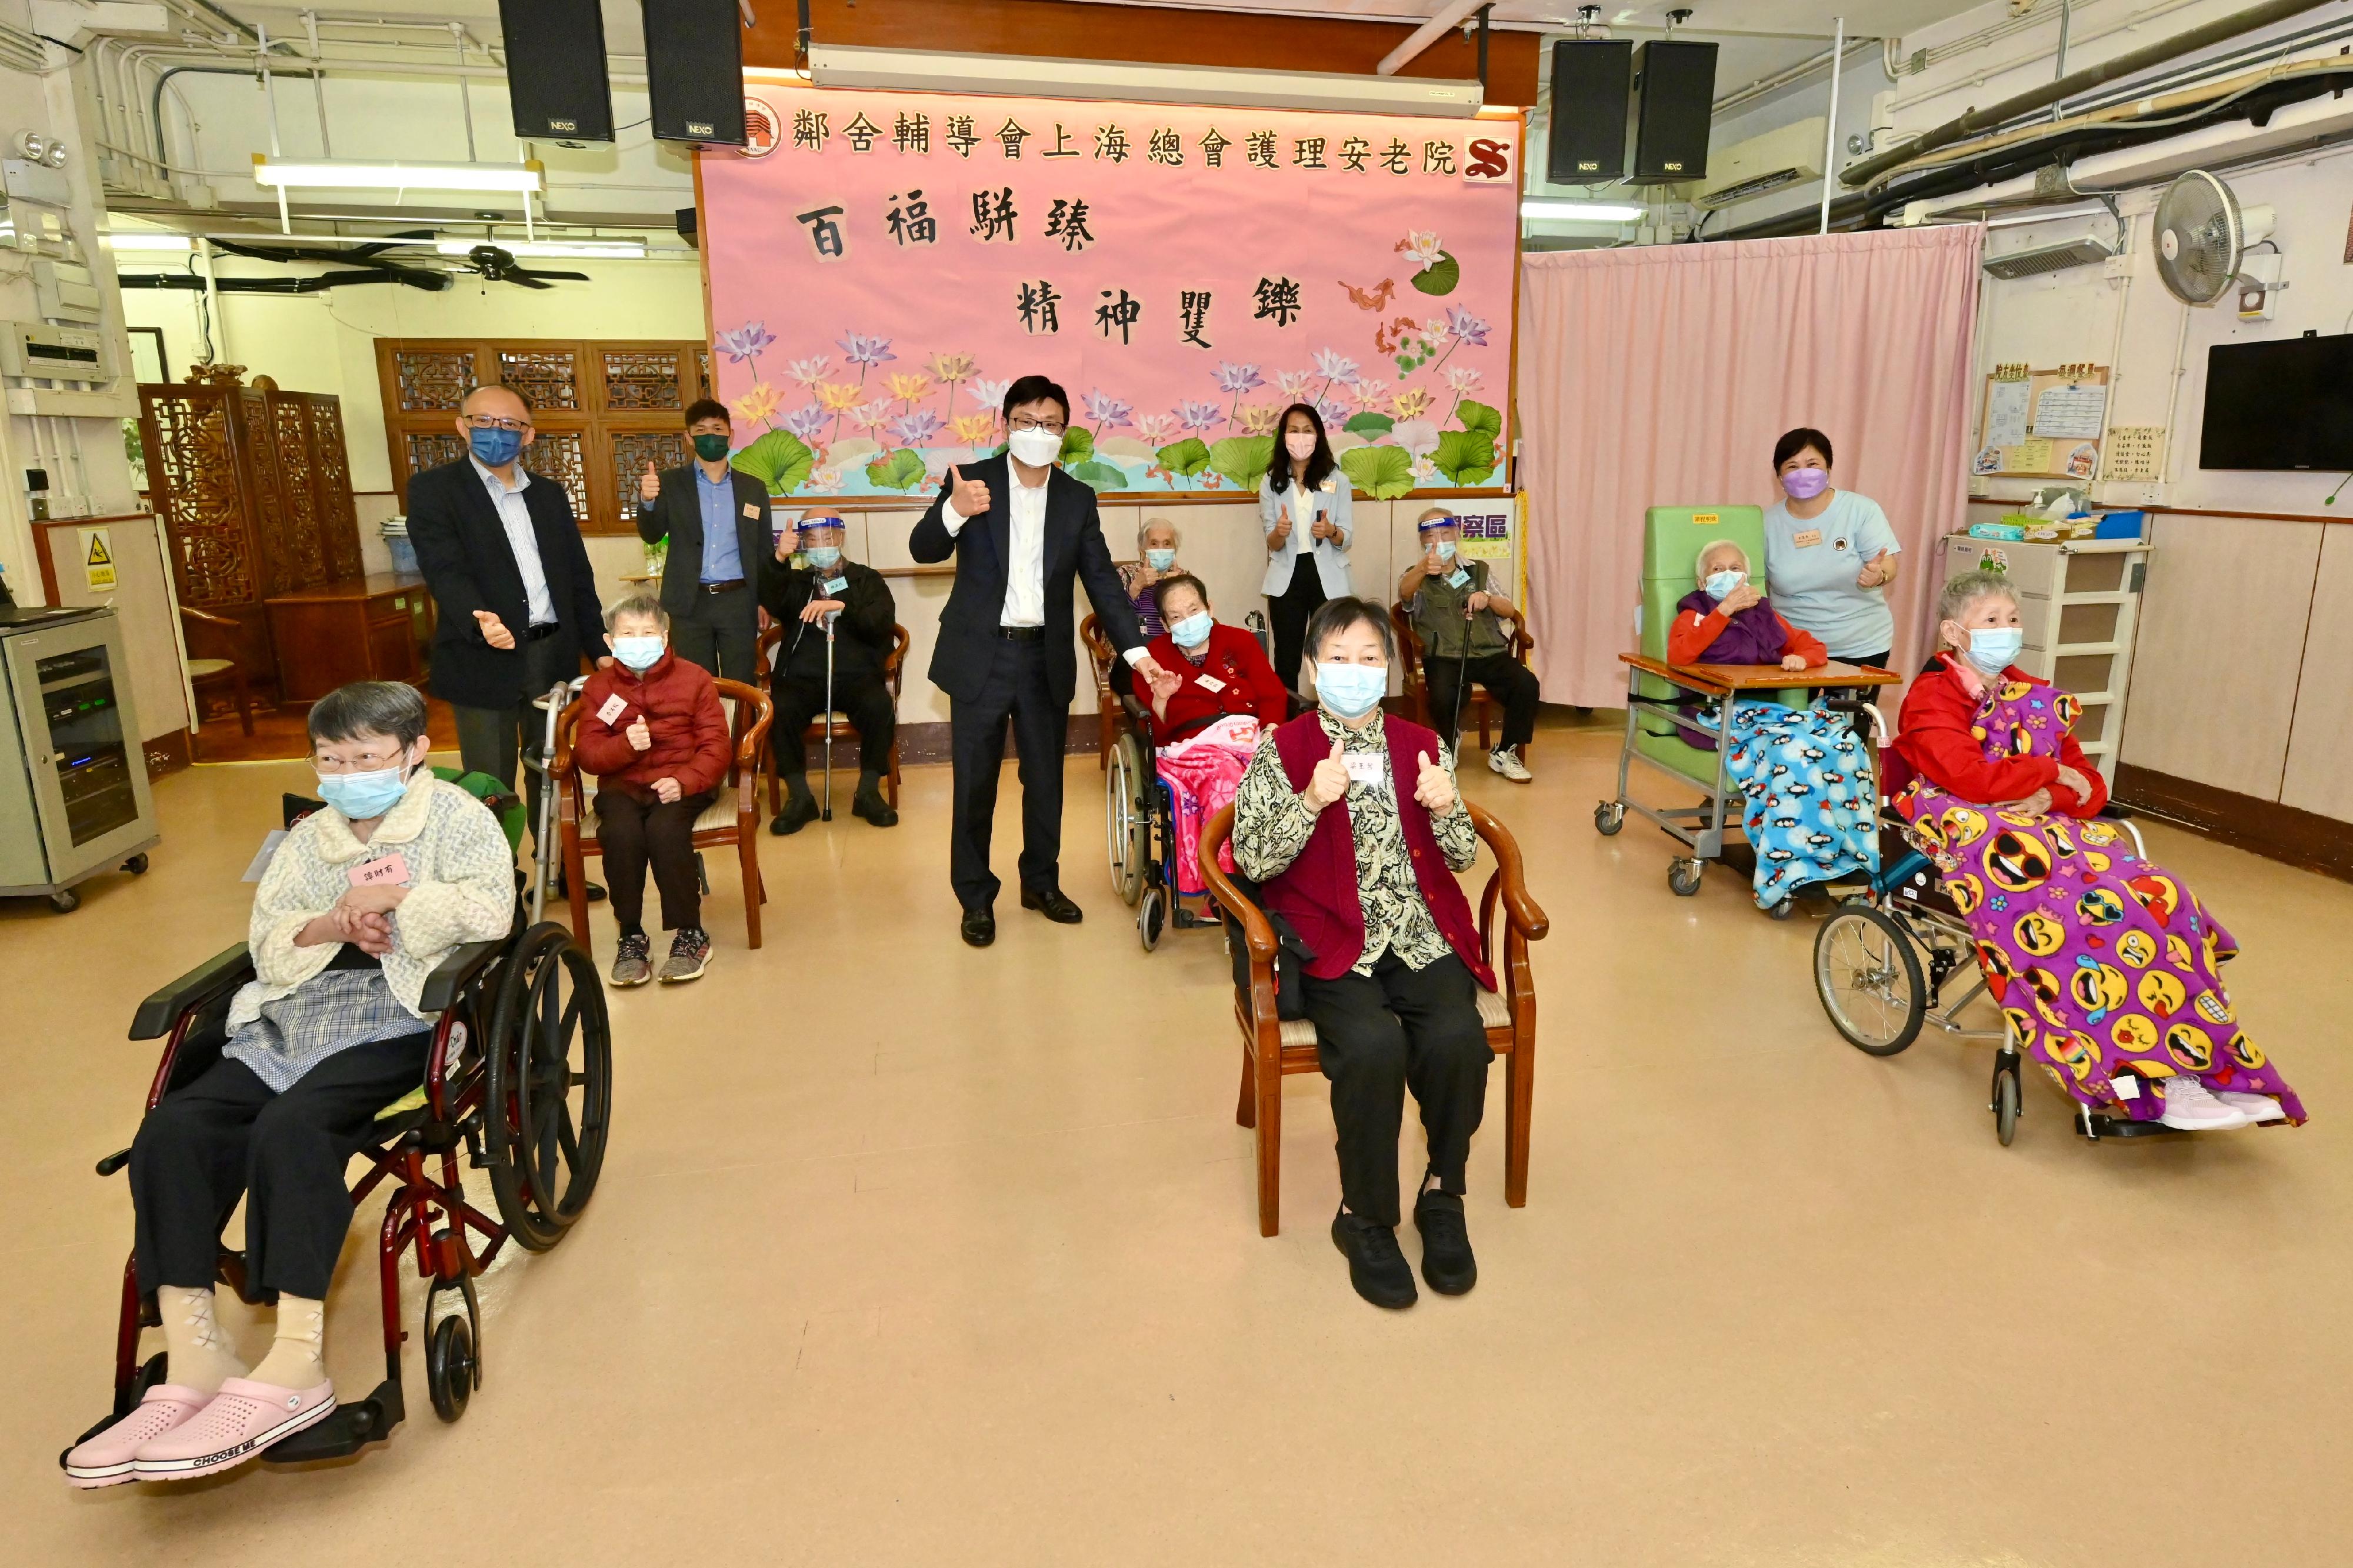 The Secretary for Labour and Welfare, Mr Chris Sun, today (July 5) inspected a COVID-19 vaccination day at a residential care home for the elderly in Ho Man Tin to take a closer look at the latest progress of outreach vaccination for residential care homes. Photo shows Mr Sun (second row, third left); the Executive Director of the Neighbourhood Advice-Action Council, Ms Fung Sau-man (third row, second right); and the Assistant Director of Social Welfare (Elderly), Mr Tan Tick-yee (second row, first left), with residents receiving vaccination today.